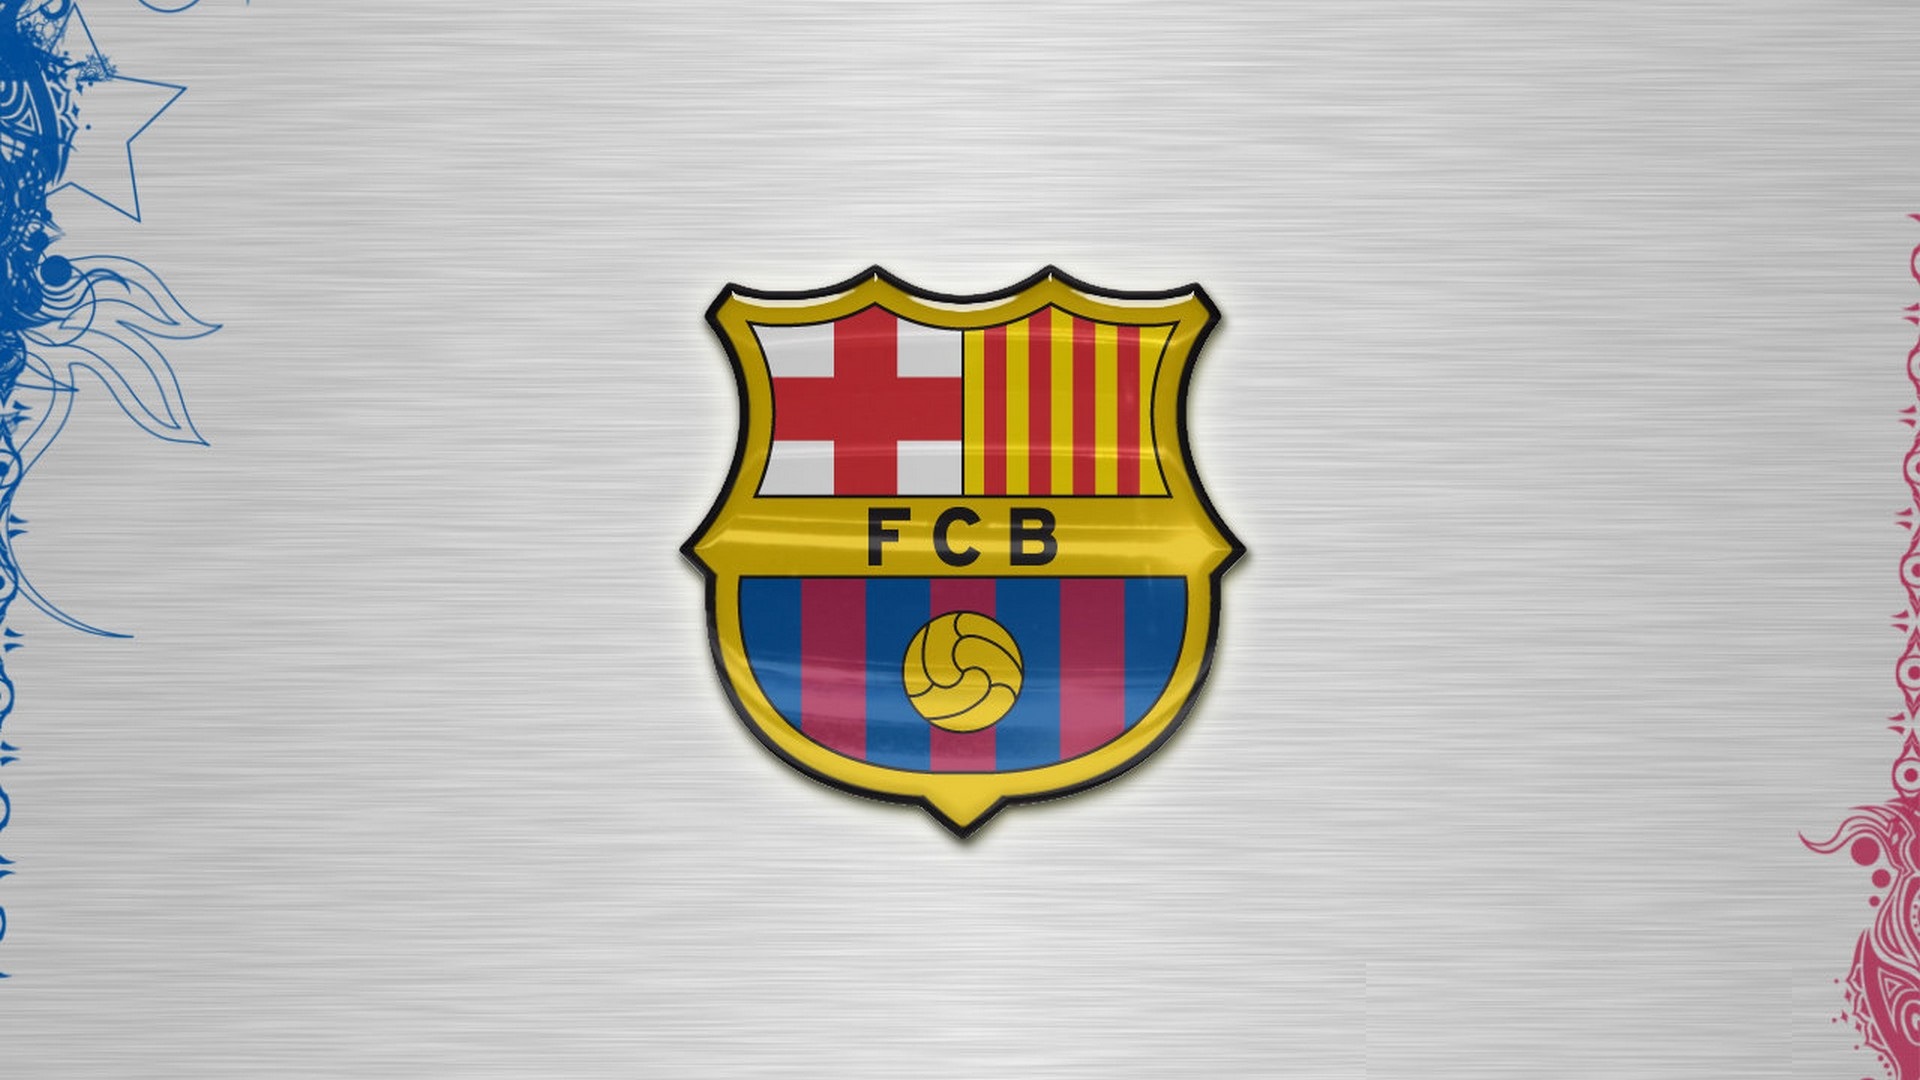 FC Barcelona Wallpaper HD With high-resolution 1920X1080 pixel. You can use this wallpaper for your Desktop Computers, Mac Screensavers, Windows Backgrounds, iPhone Wallpapers, Tablet or Android Lock screen and another Mobile device